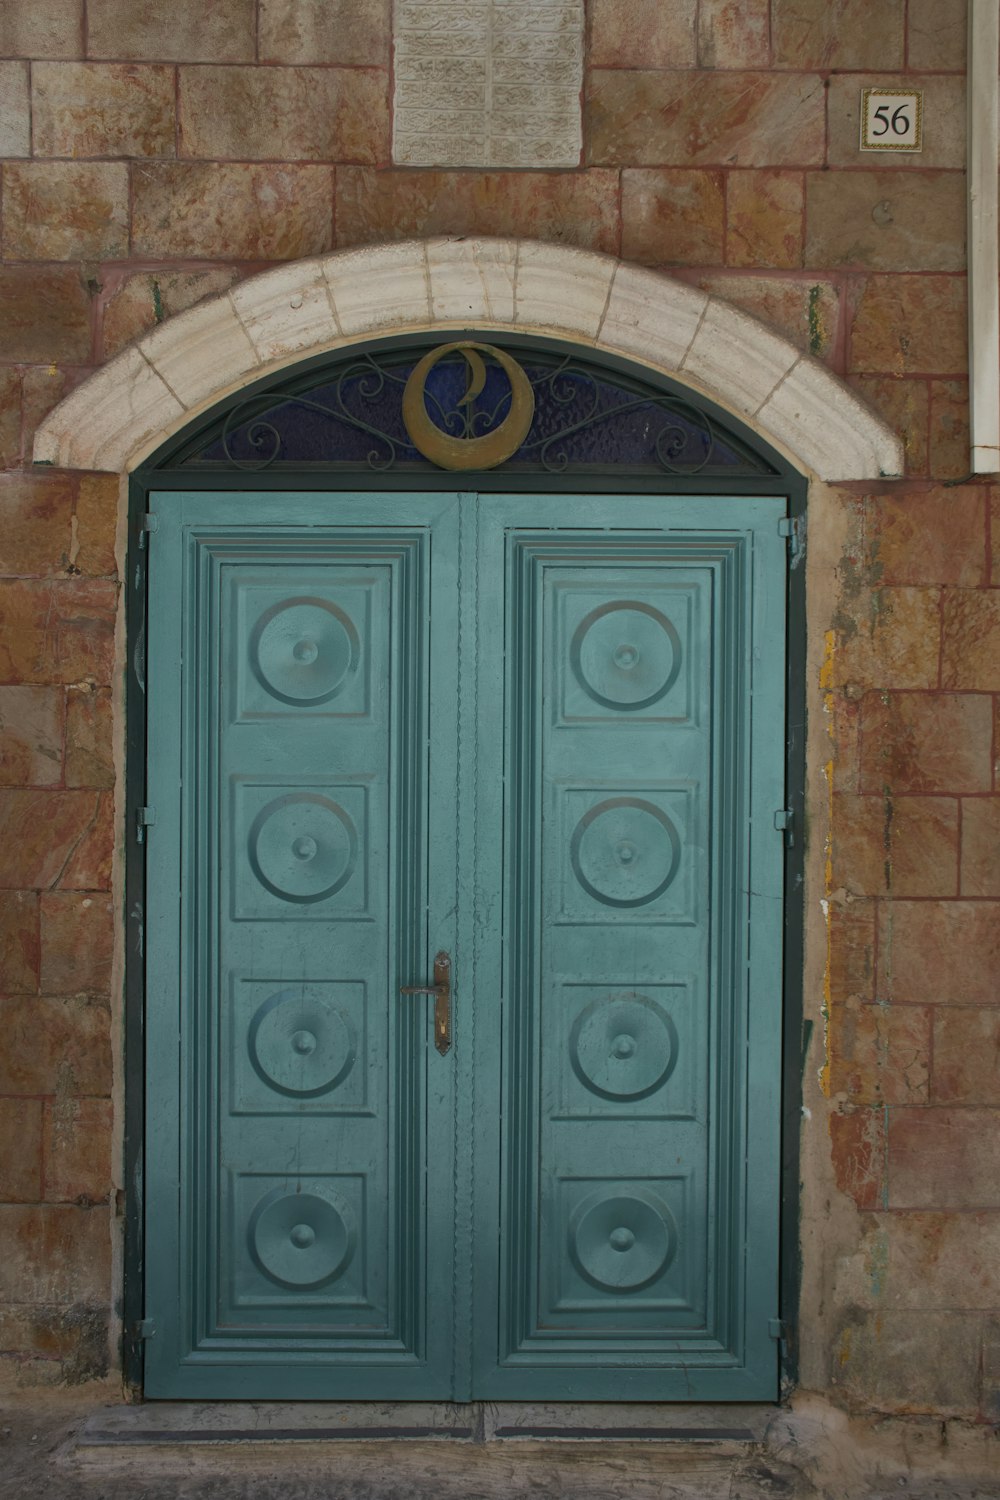 a blue door with a clock on the side of it